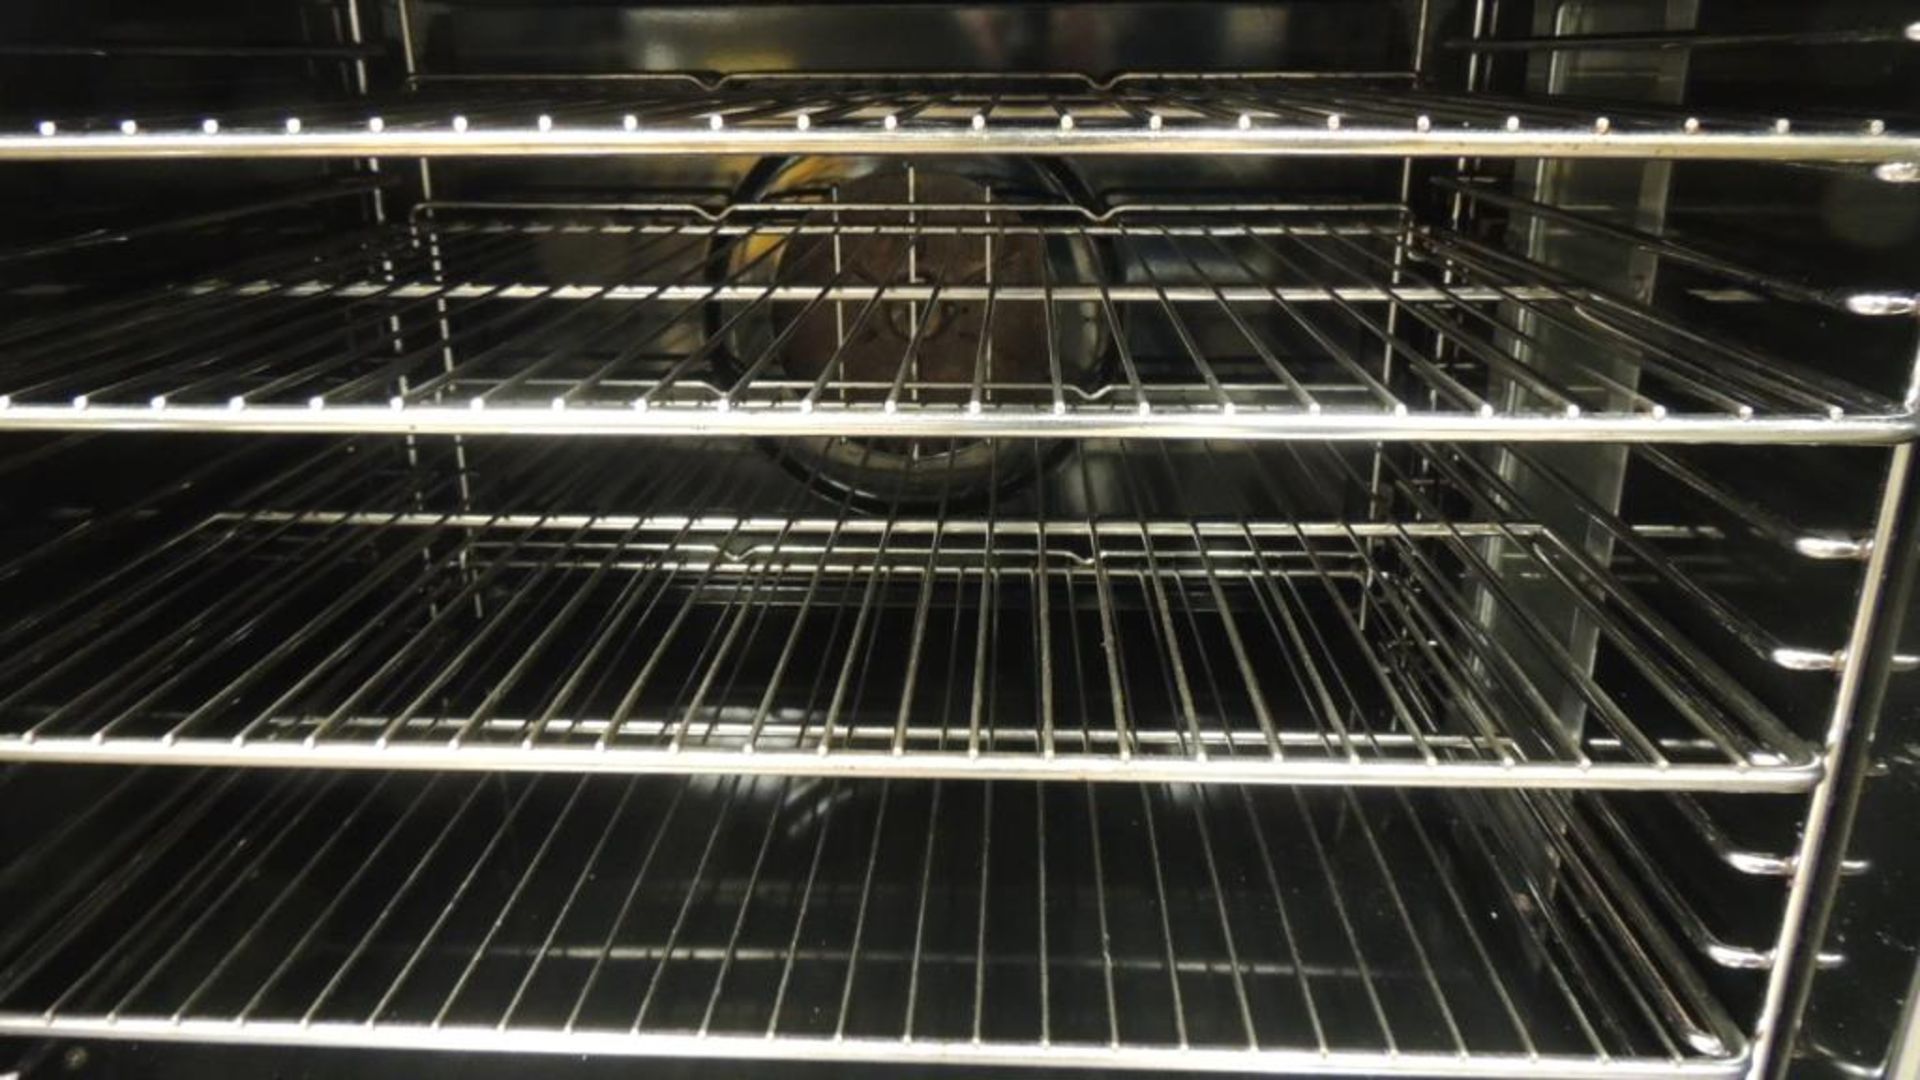 Oven - Image 6 of 7